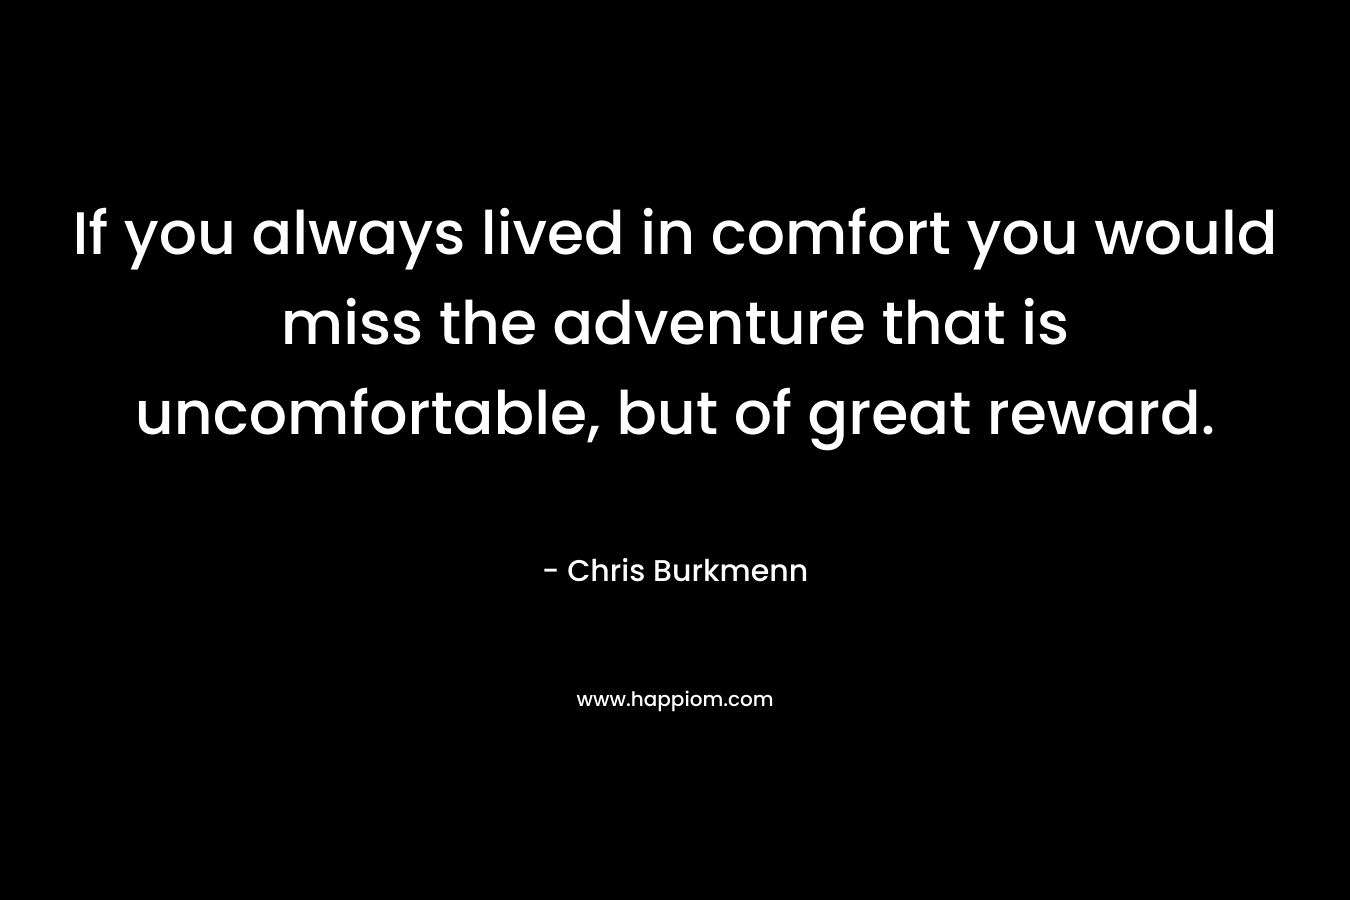 If you always lived in comfort you would miss the adventure that is uncomfortable, but of great reward. – Chris Burkmenn